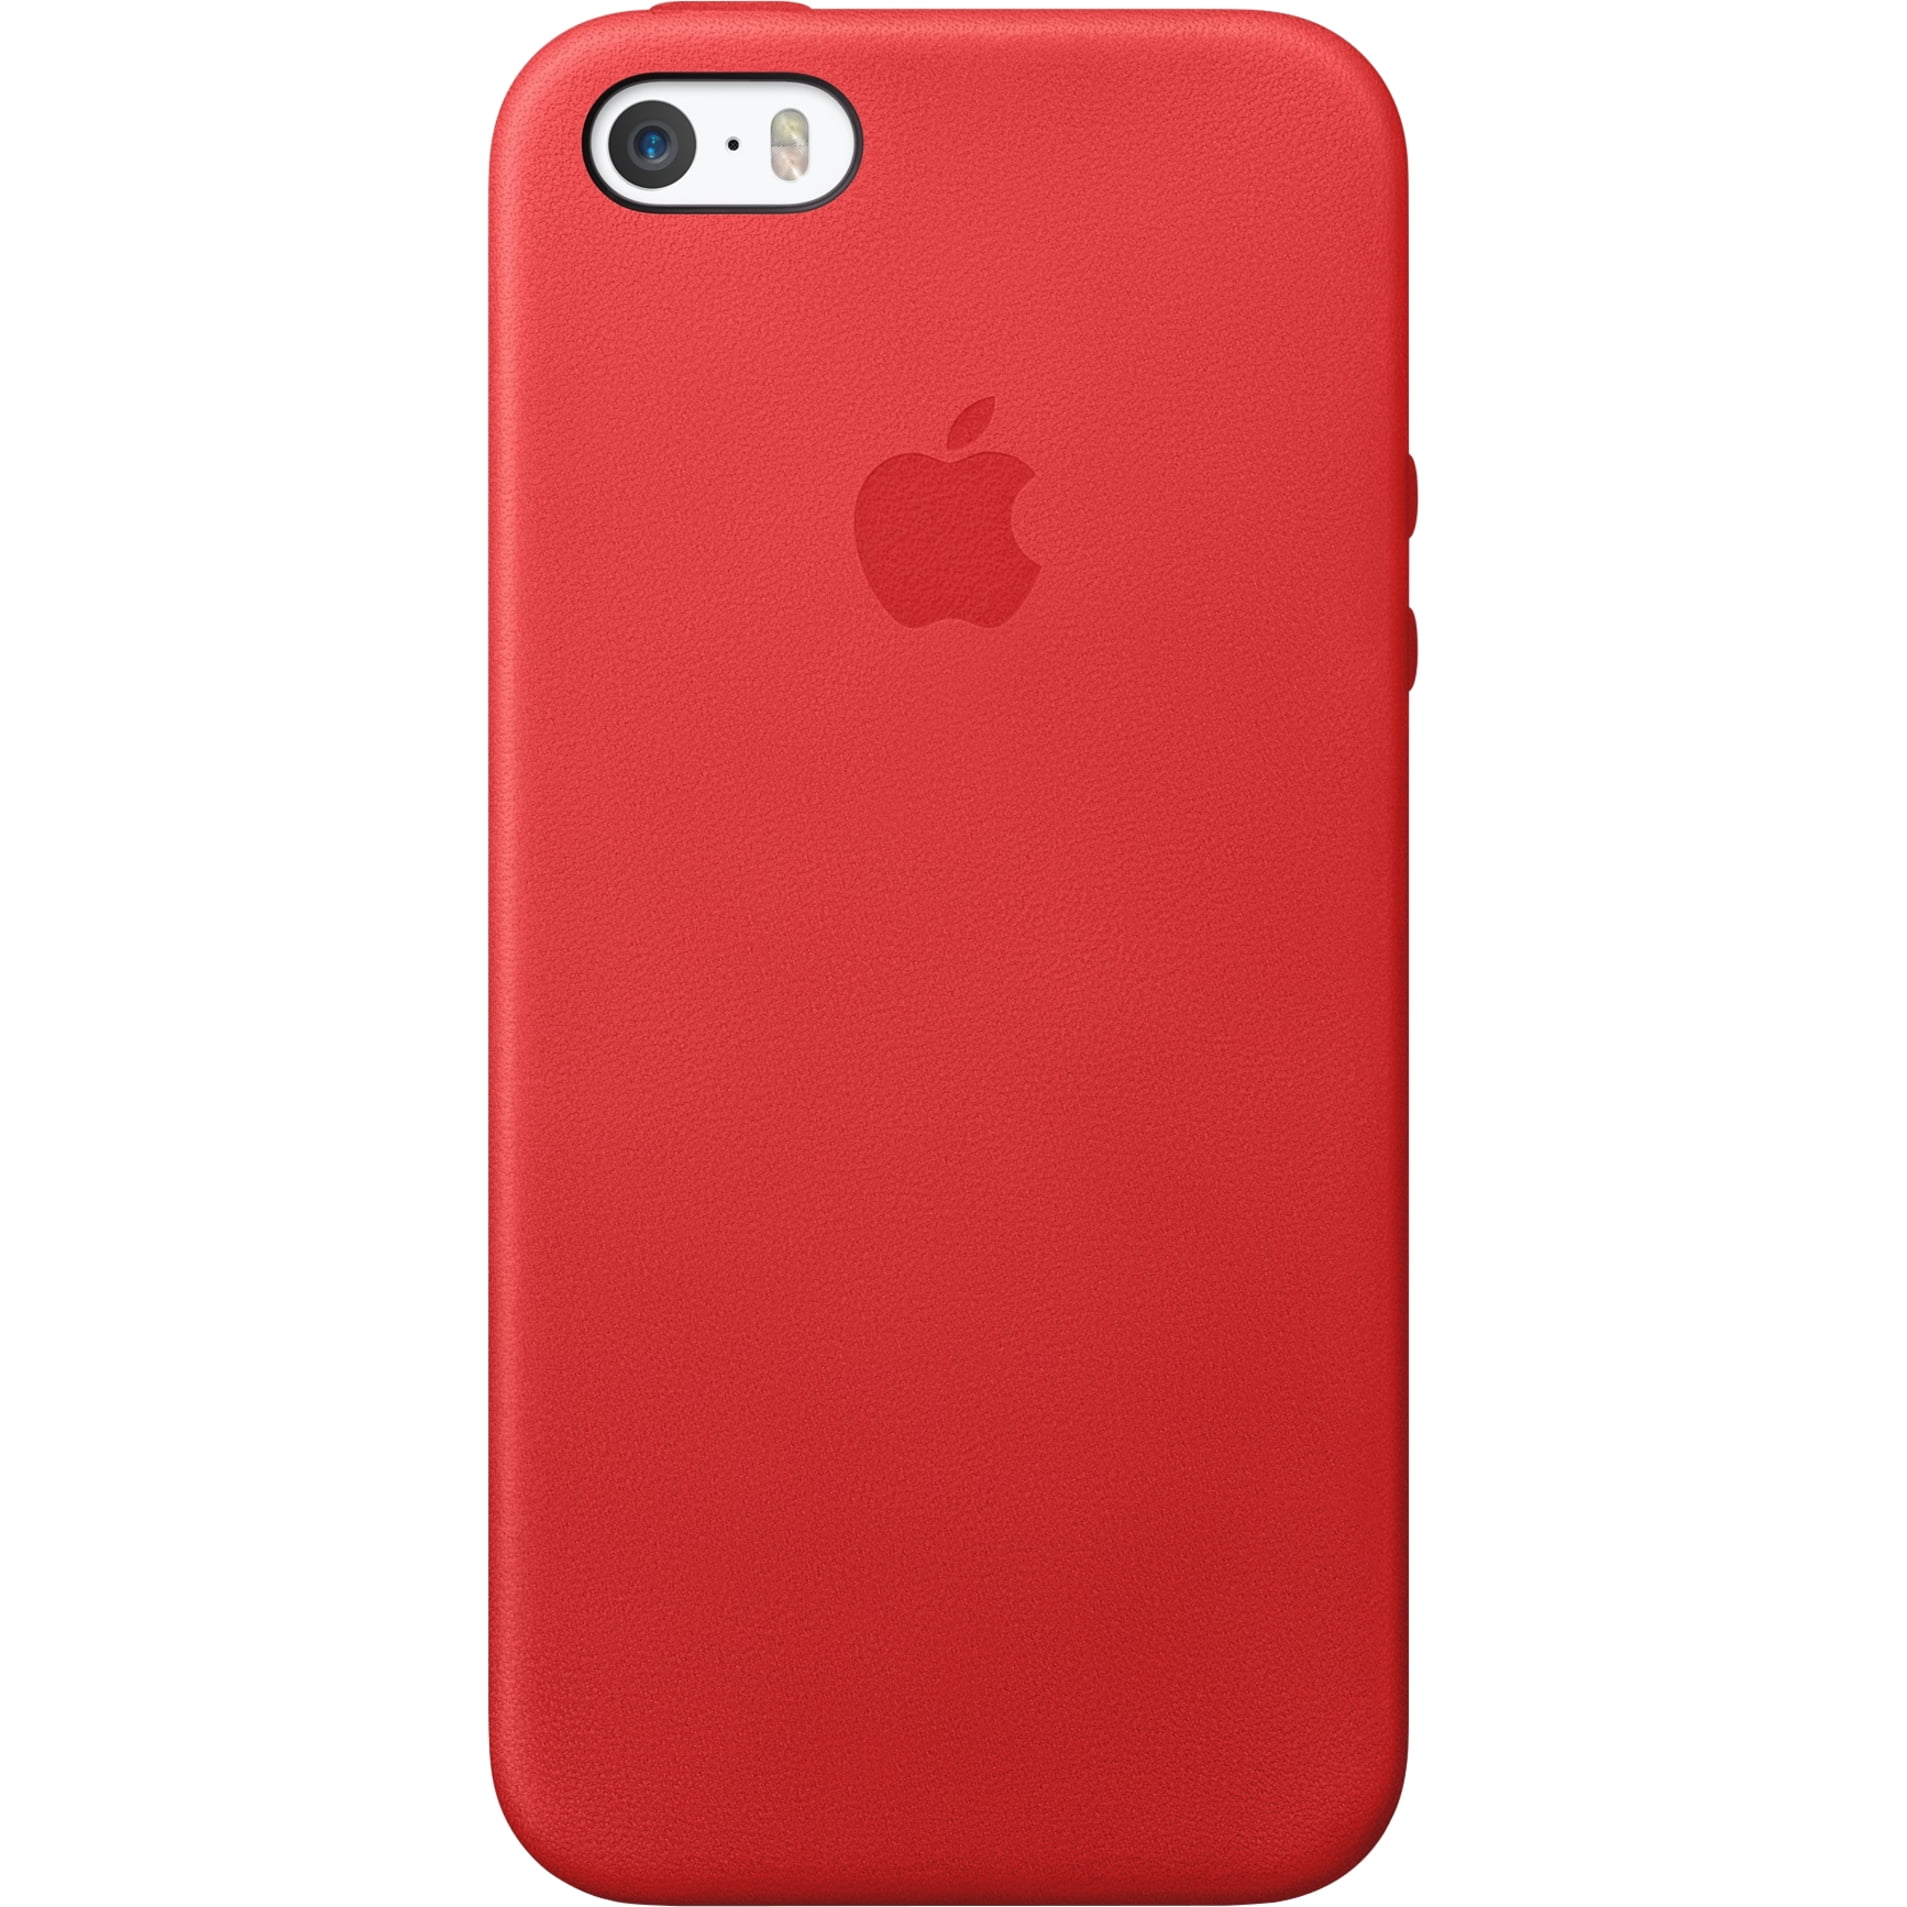 Zijdelings Kers Stiptheid Apple Red Leather Case for iPhone 5s MF046LL/A - Walmart.com